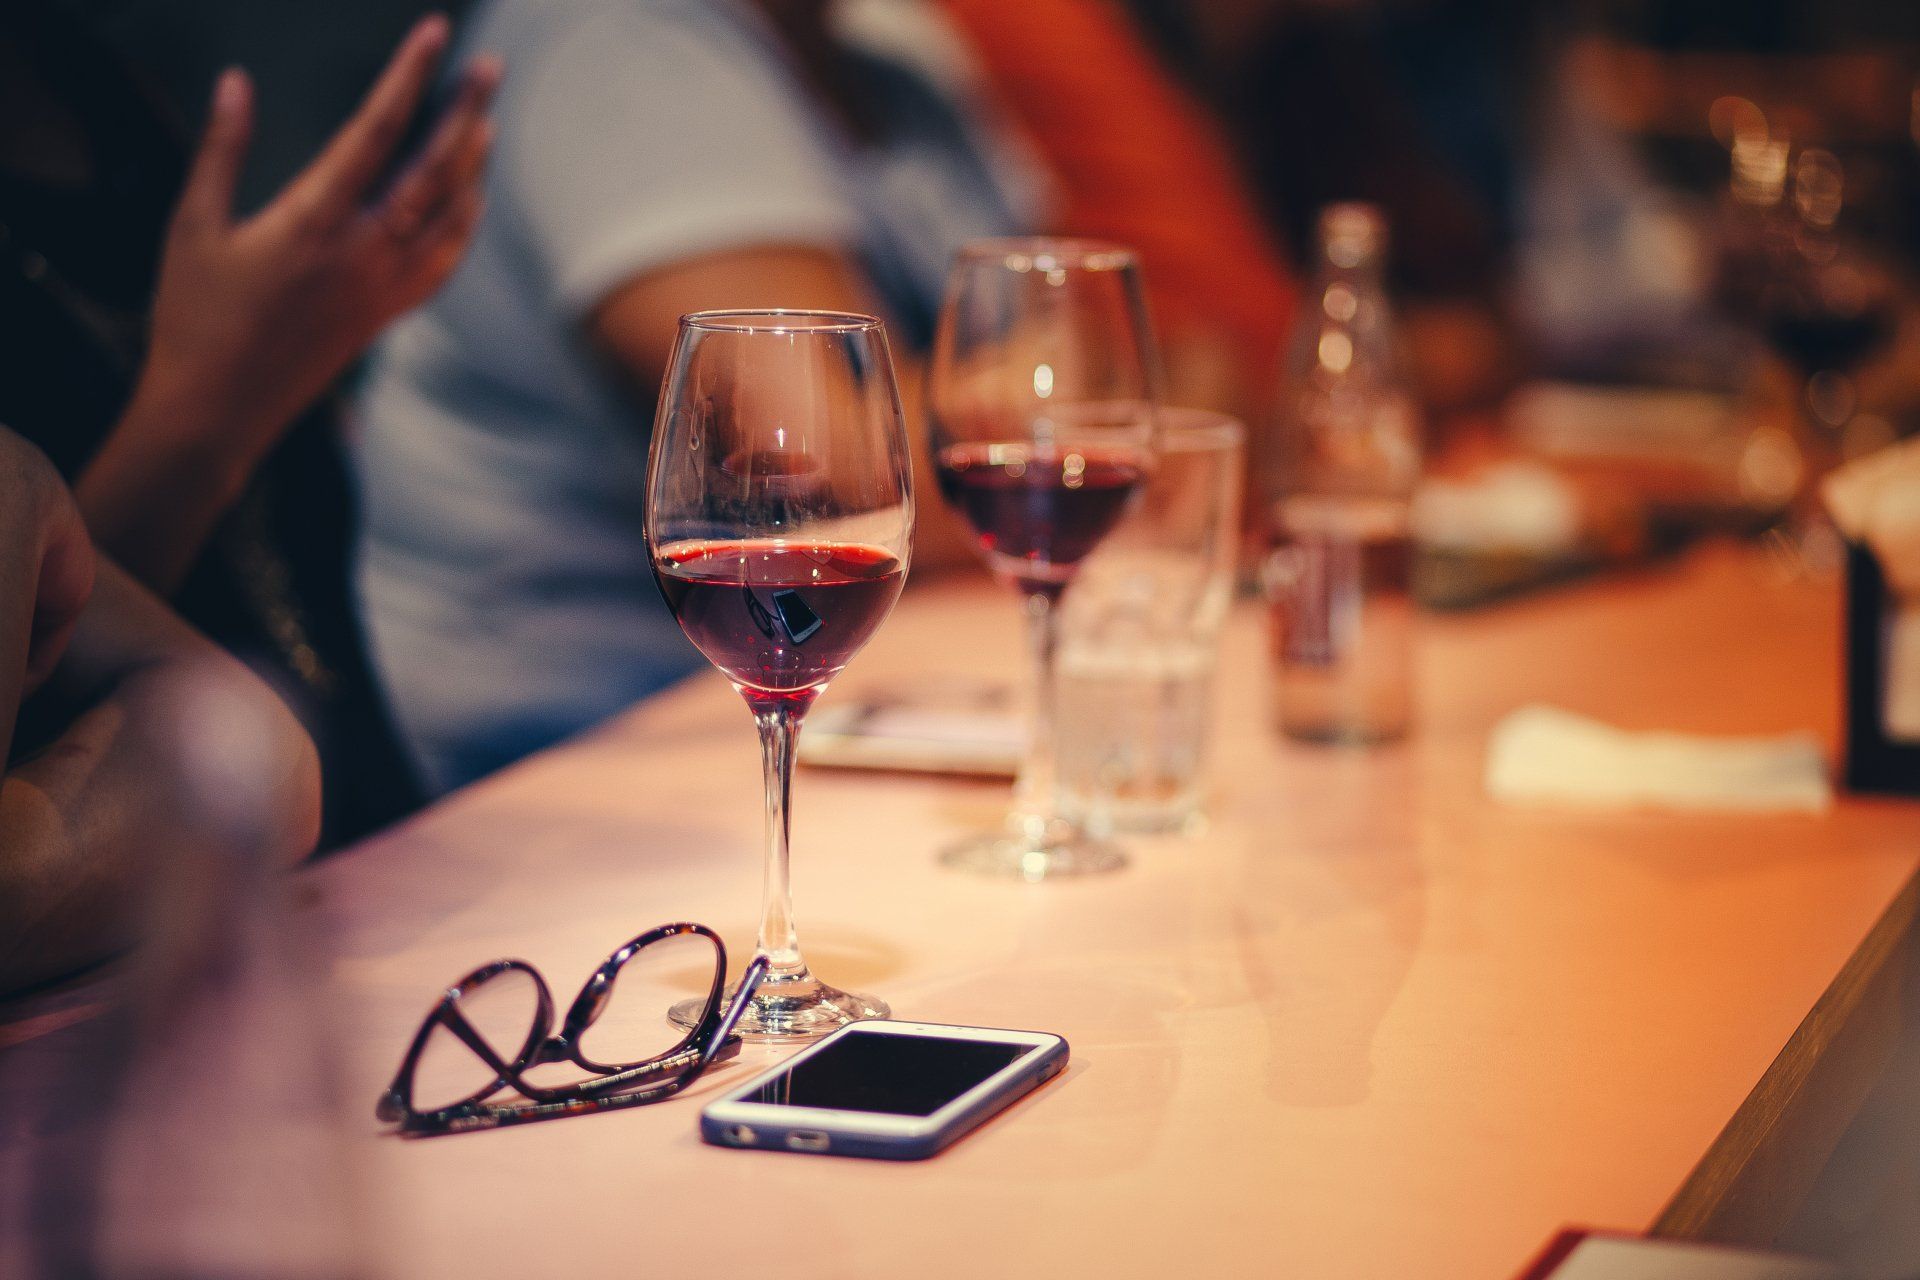 2 glasses of red wine, glasses and a phone sitting on a bar